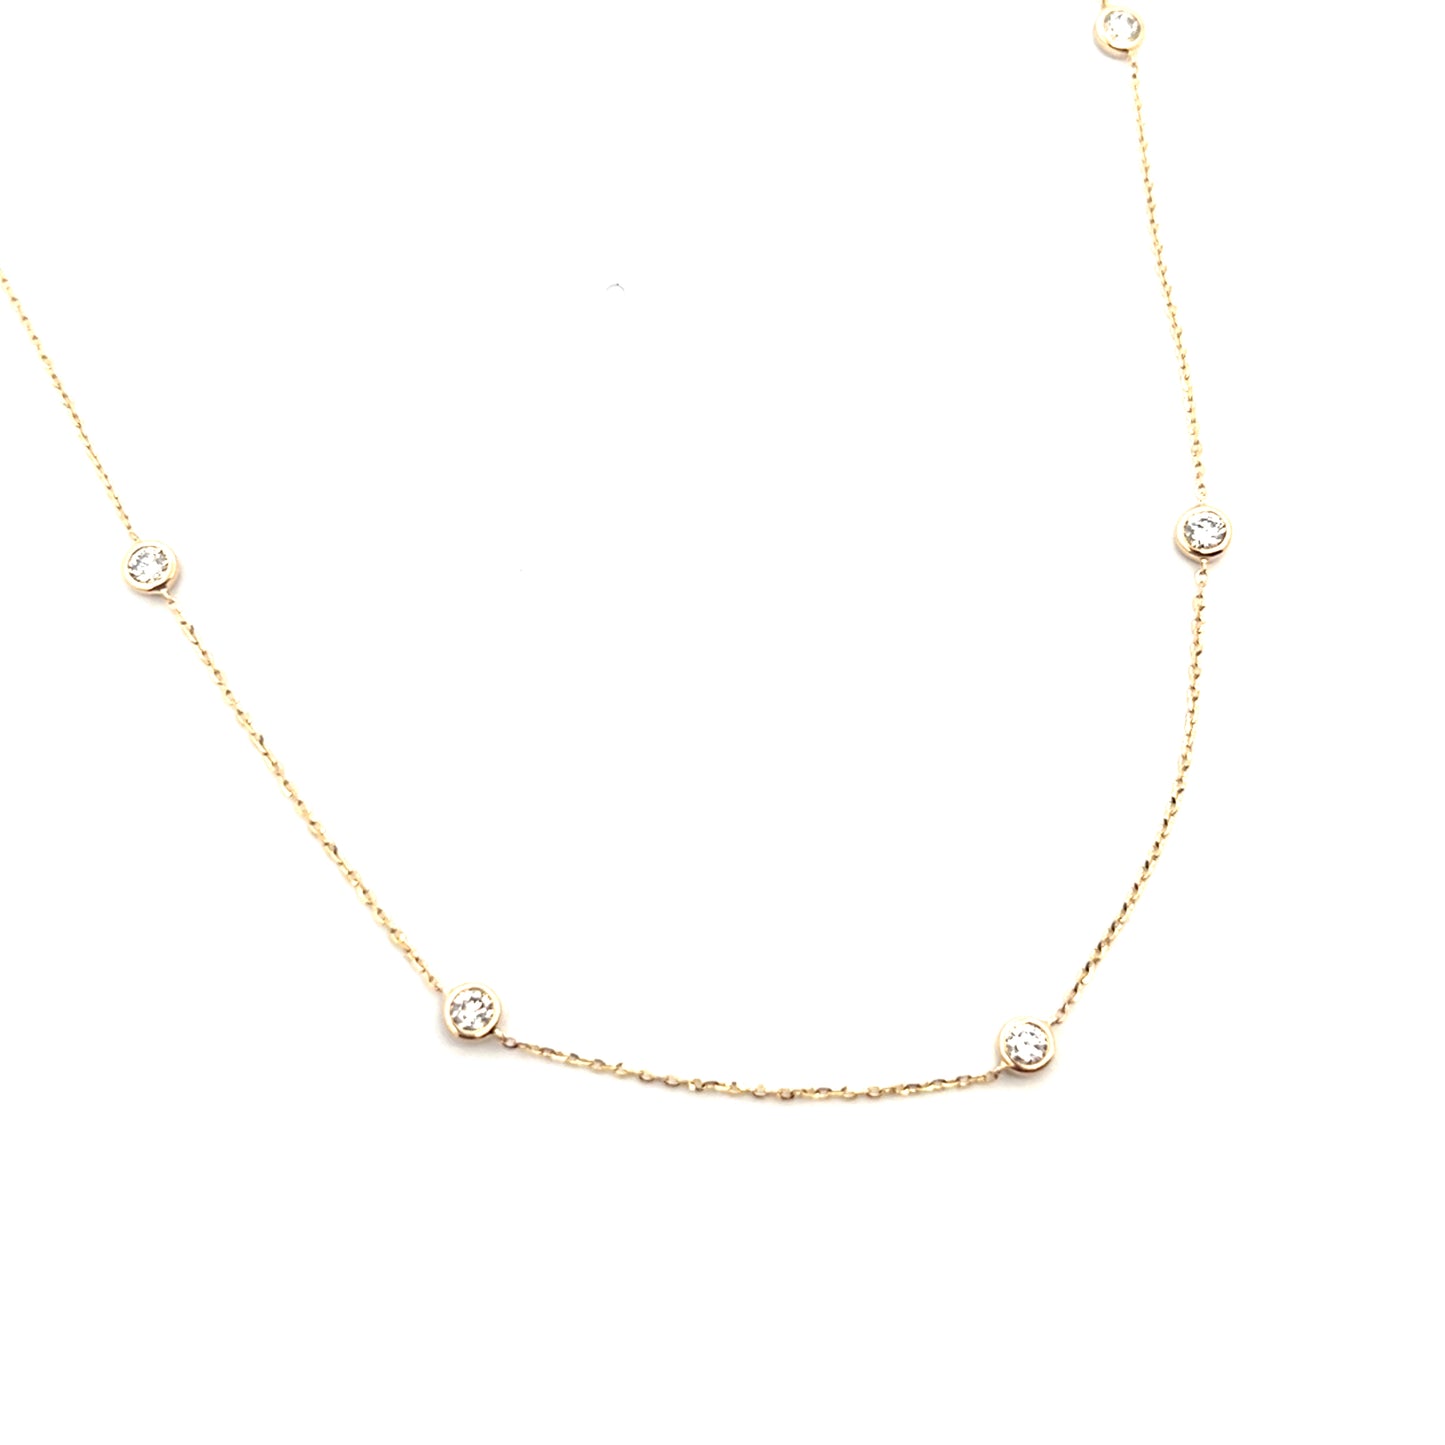 1.06cttw Diamonds By The Yard Necklace | Diamond Yard Necklace